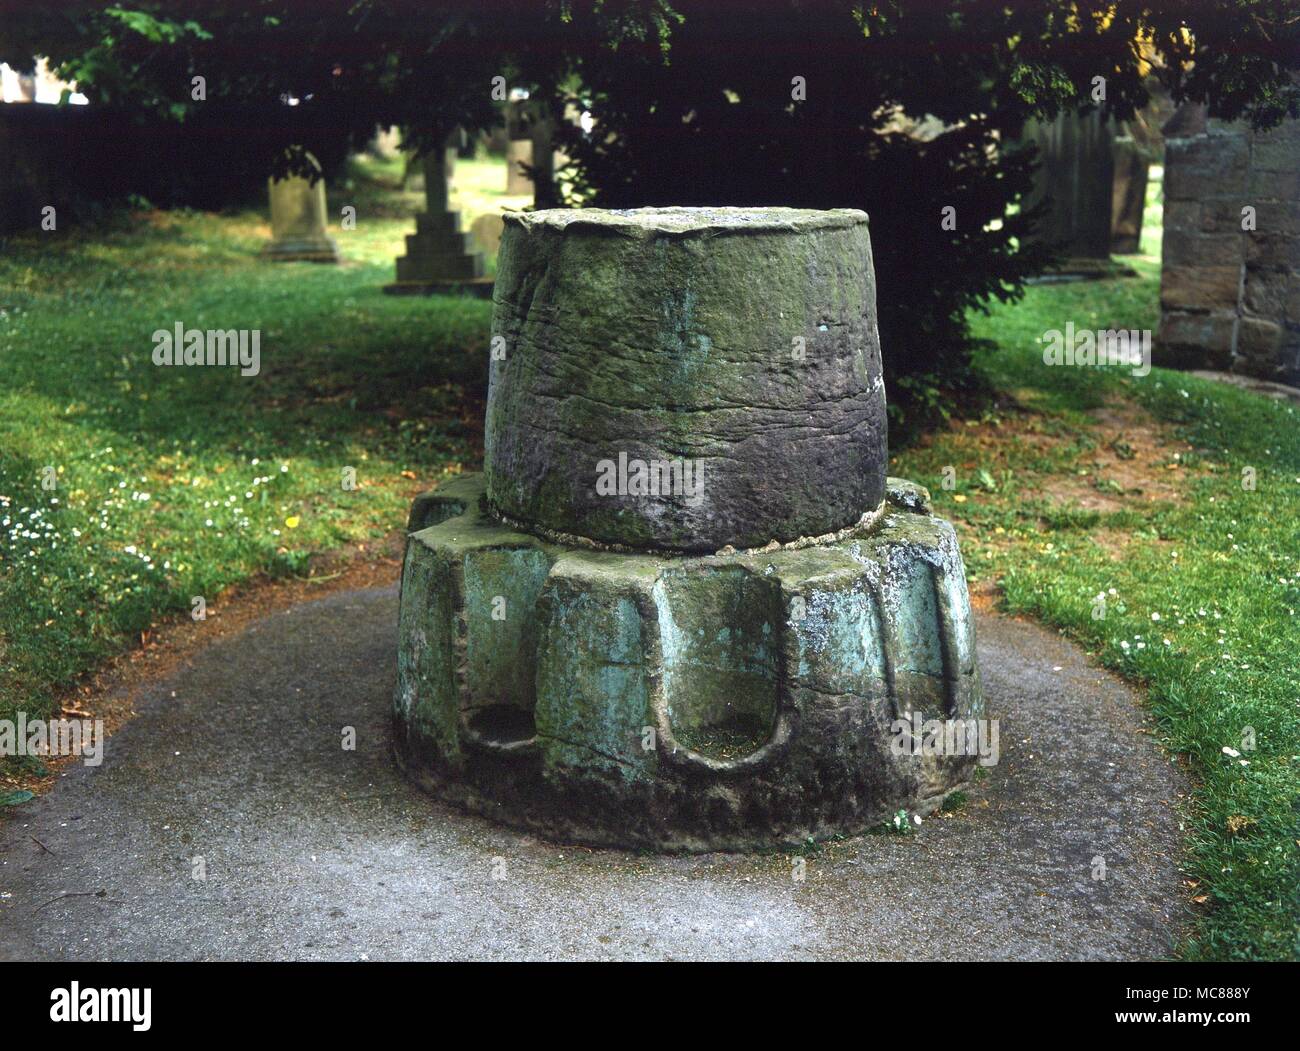 CHRISTIAN The Medieval kneeling cross (of which only the base remains) in Ripley churchyard Stock Photo